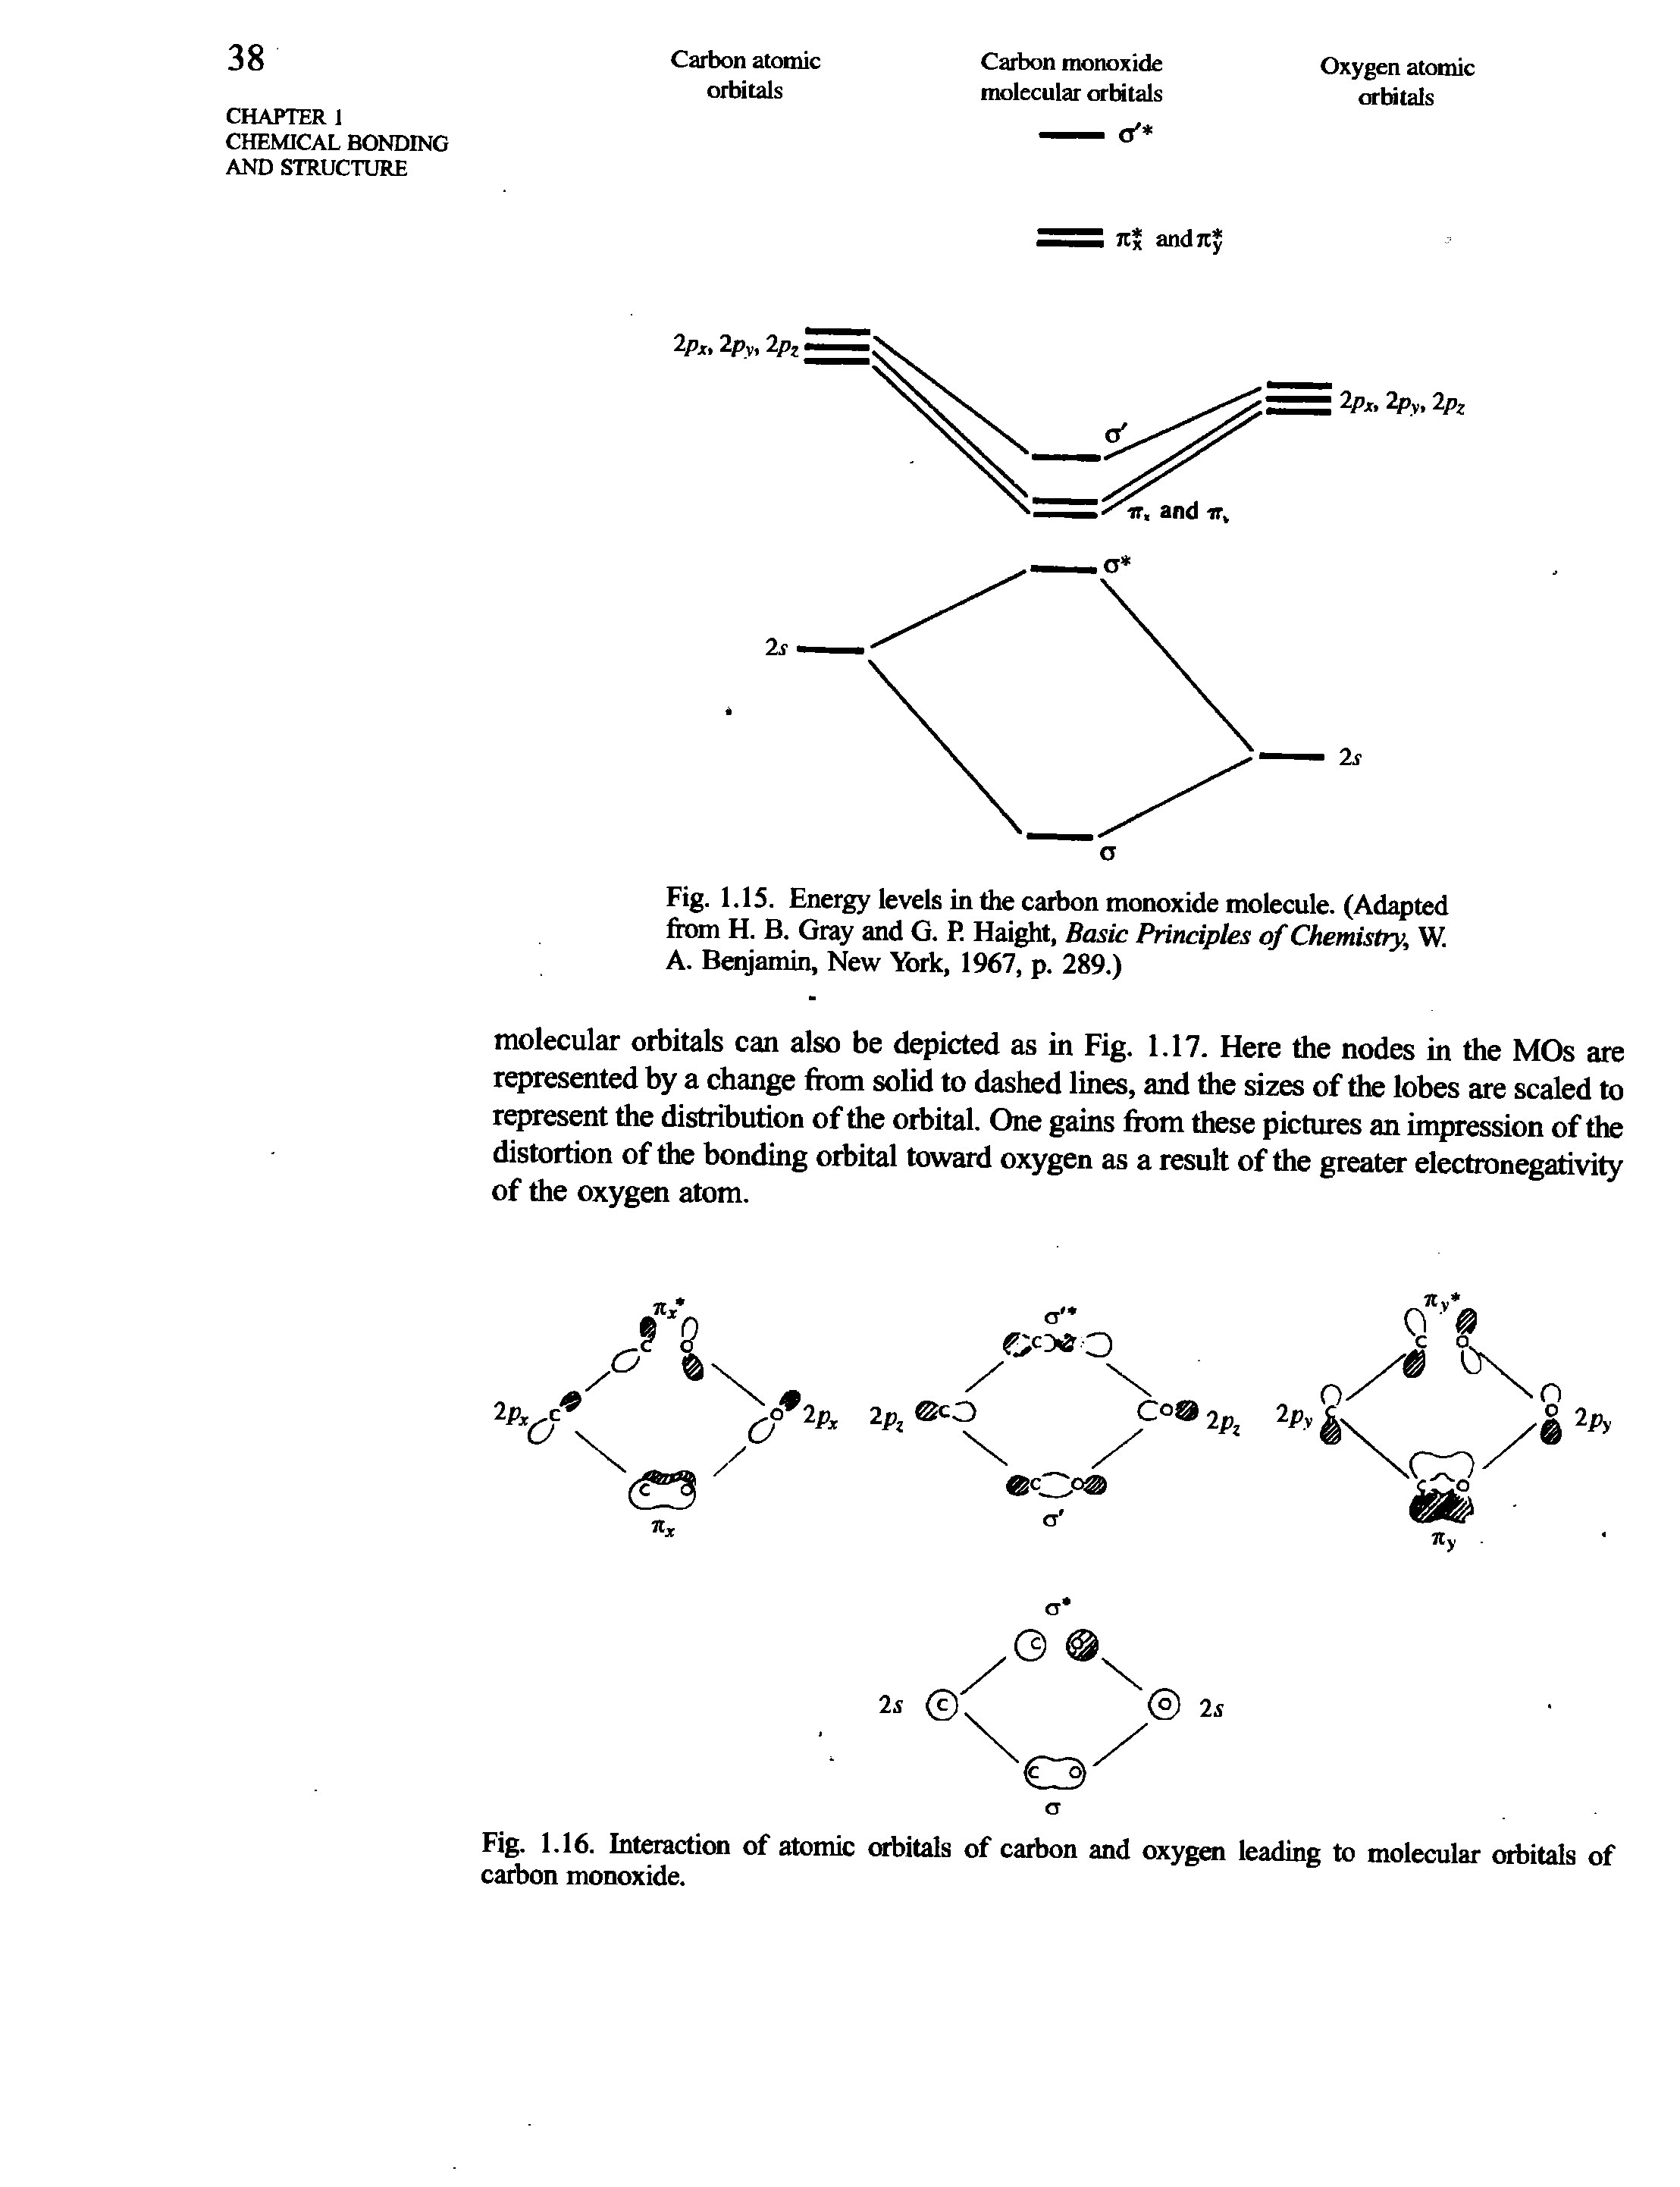 Fig. 1.15. Energy levels in the carbon monoxide molecule. (Adapted from H. B. Gray and G. P. Haight, Basic Principles of Chemistry, W.